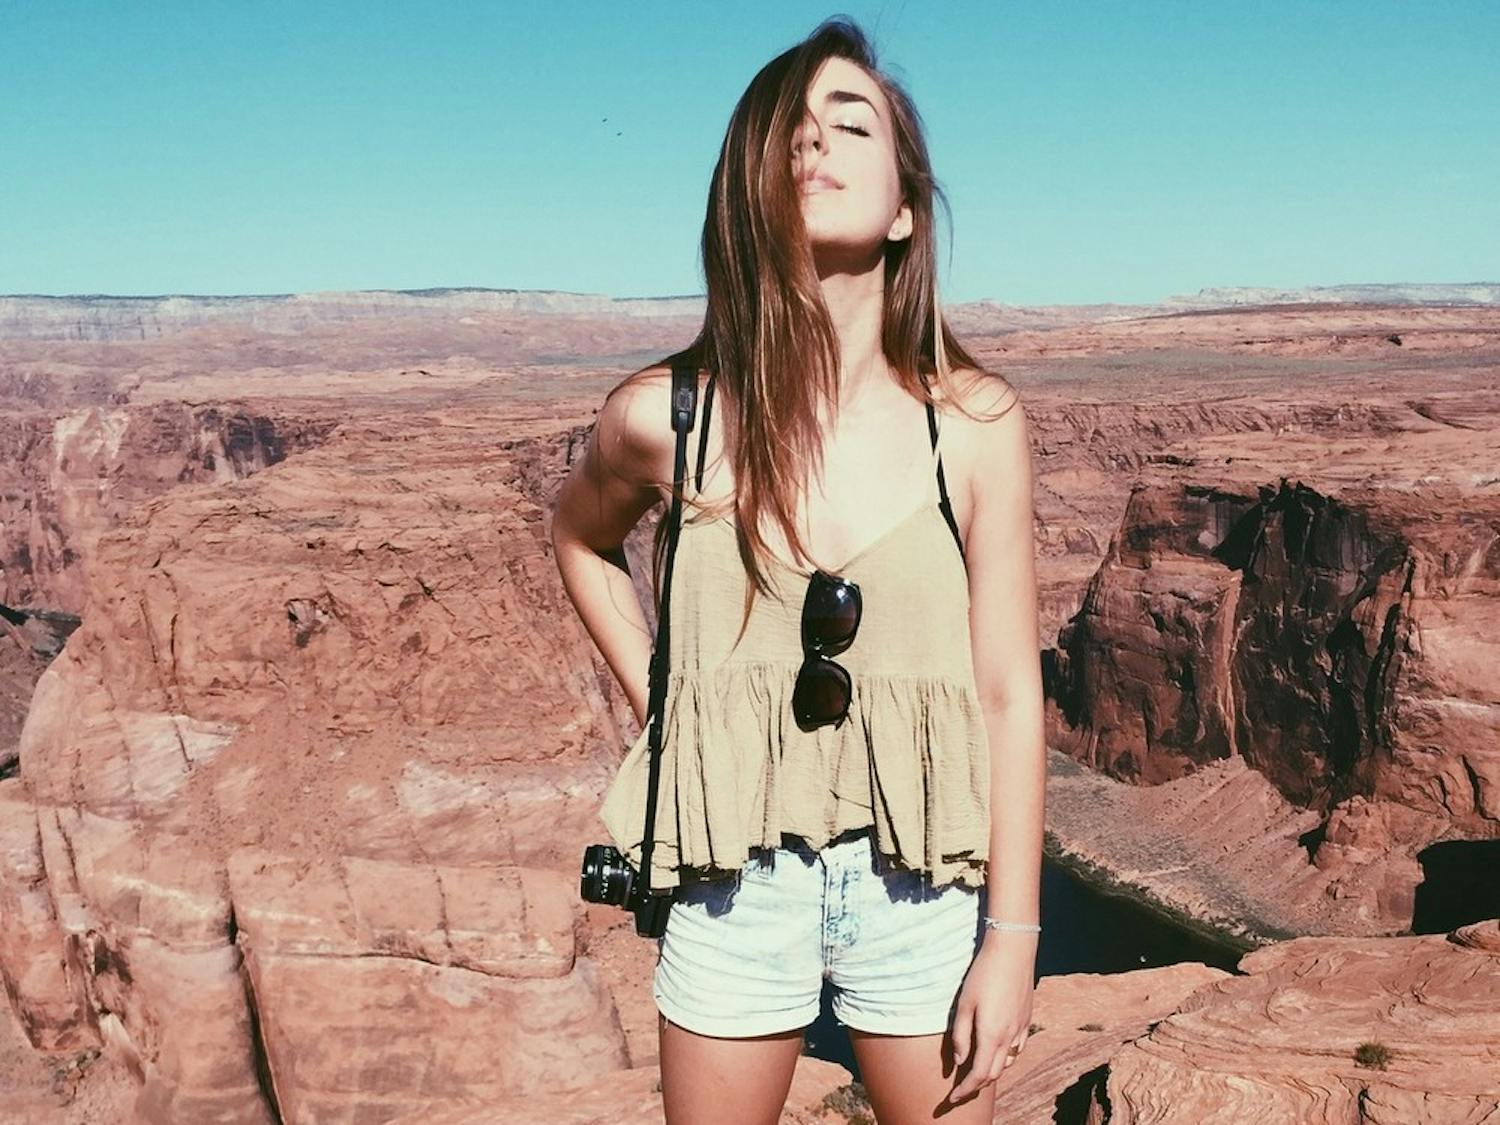 Journalism sophomore Mallory Prater has had two of her photos featured on Urban Outfitters' Arizona Instagram account.